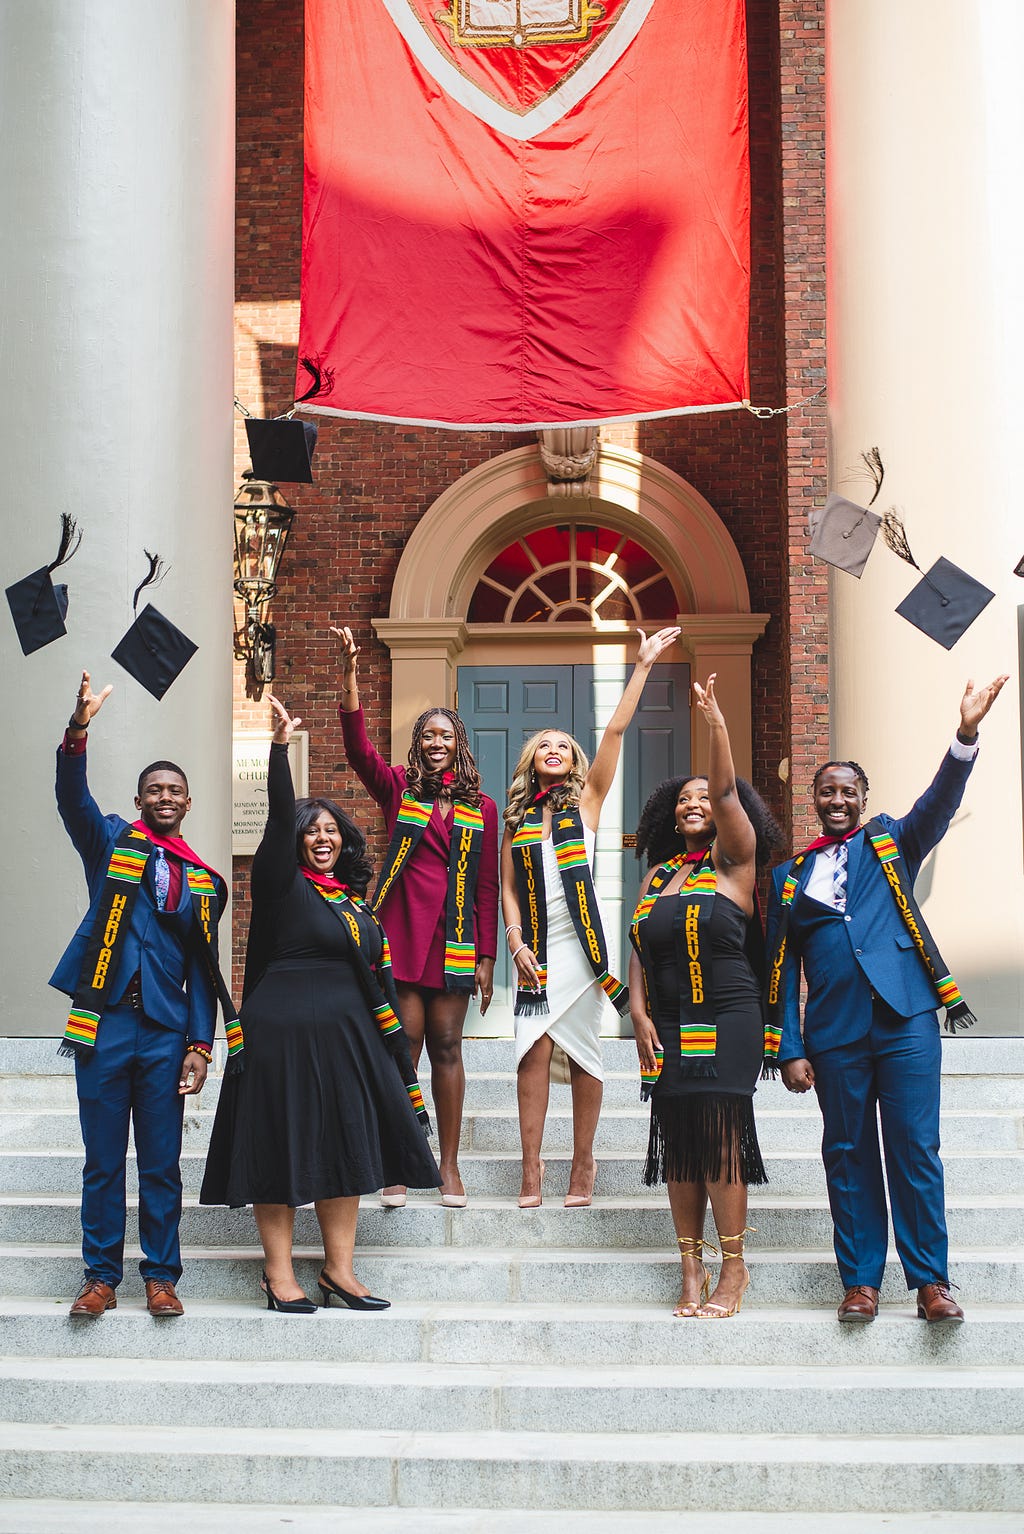 A group of six recent graduate students throw their graduation caps into the air in a celebratory mood.